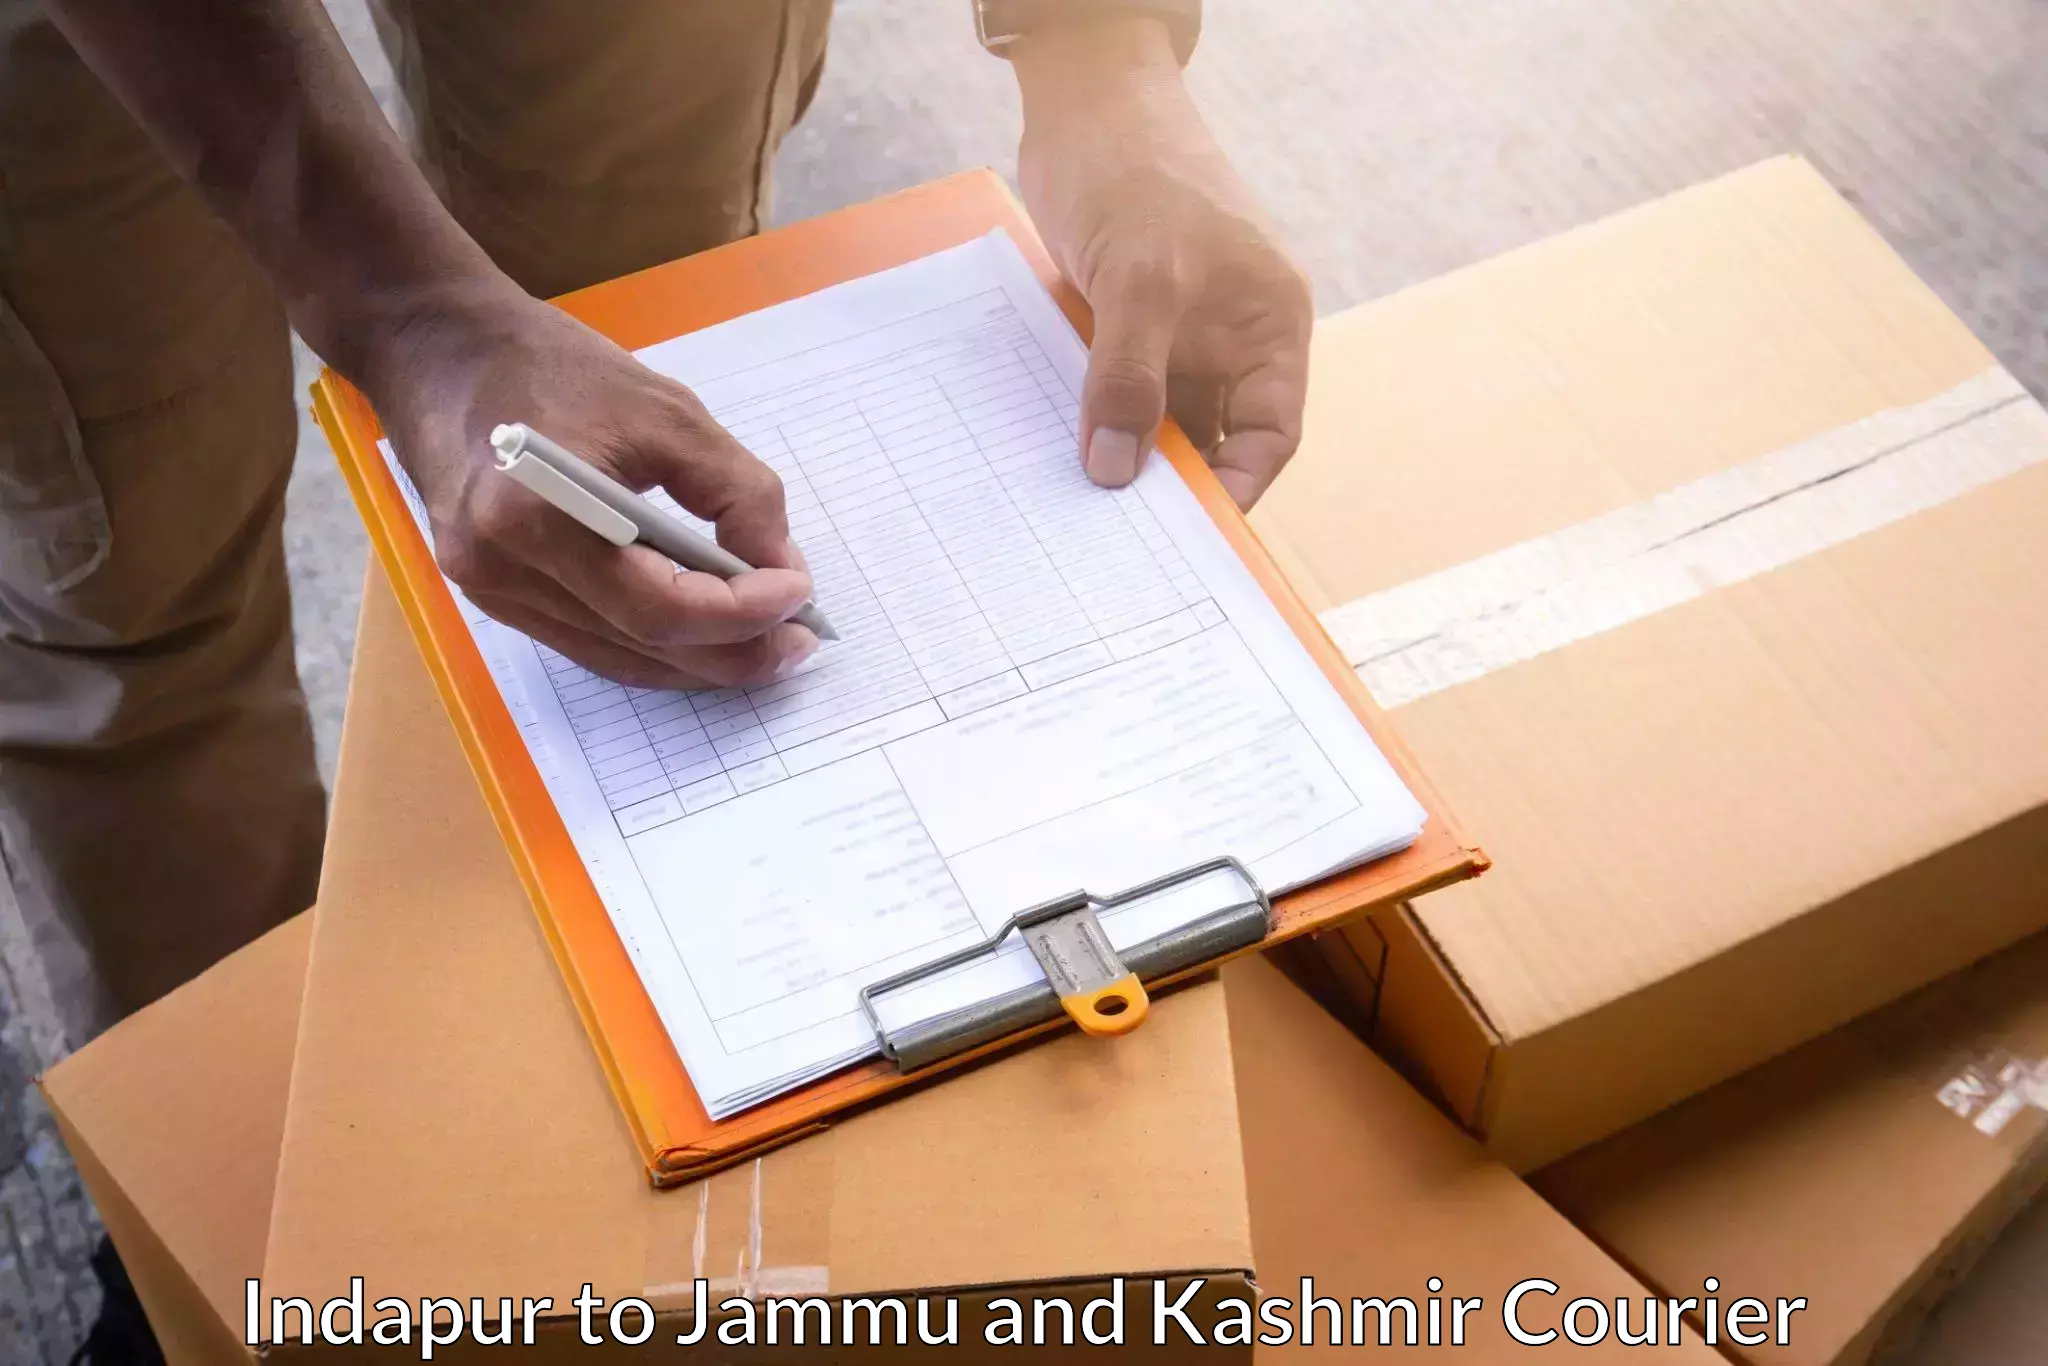 Full-service courier options in Indapur to Anantnag